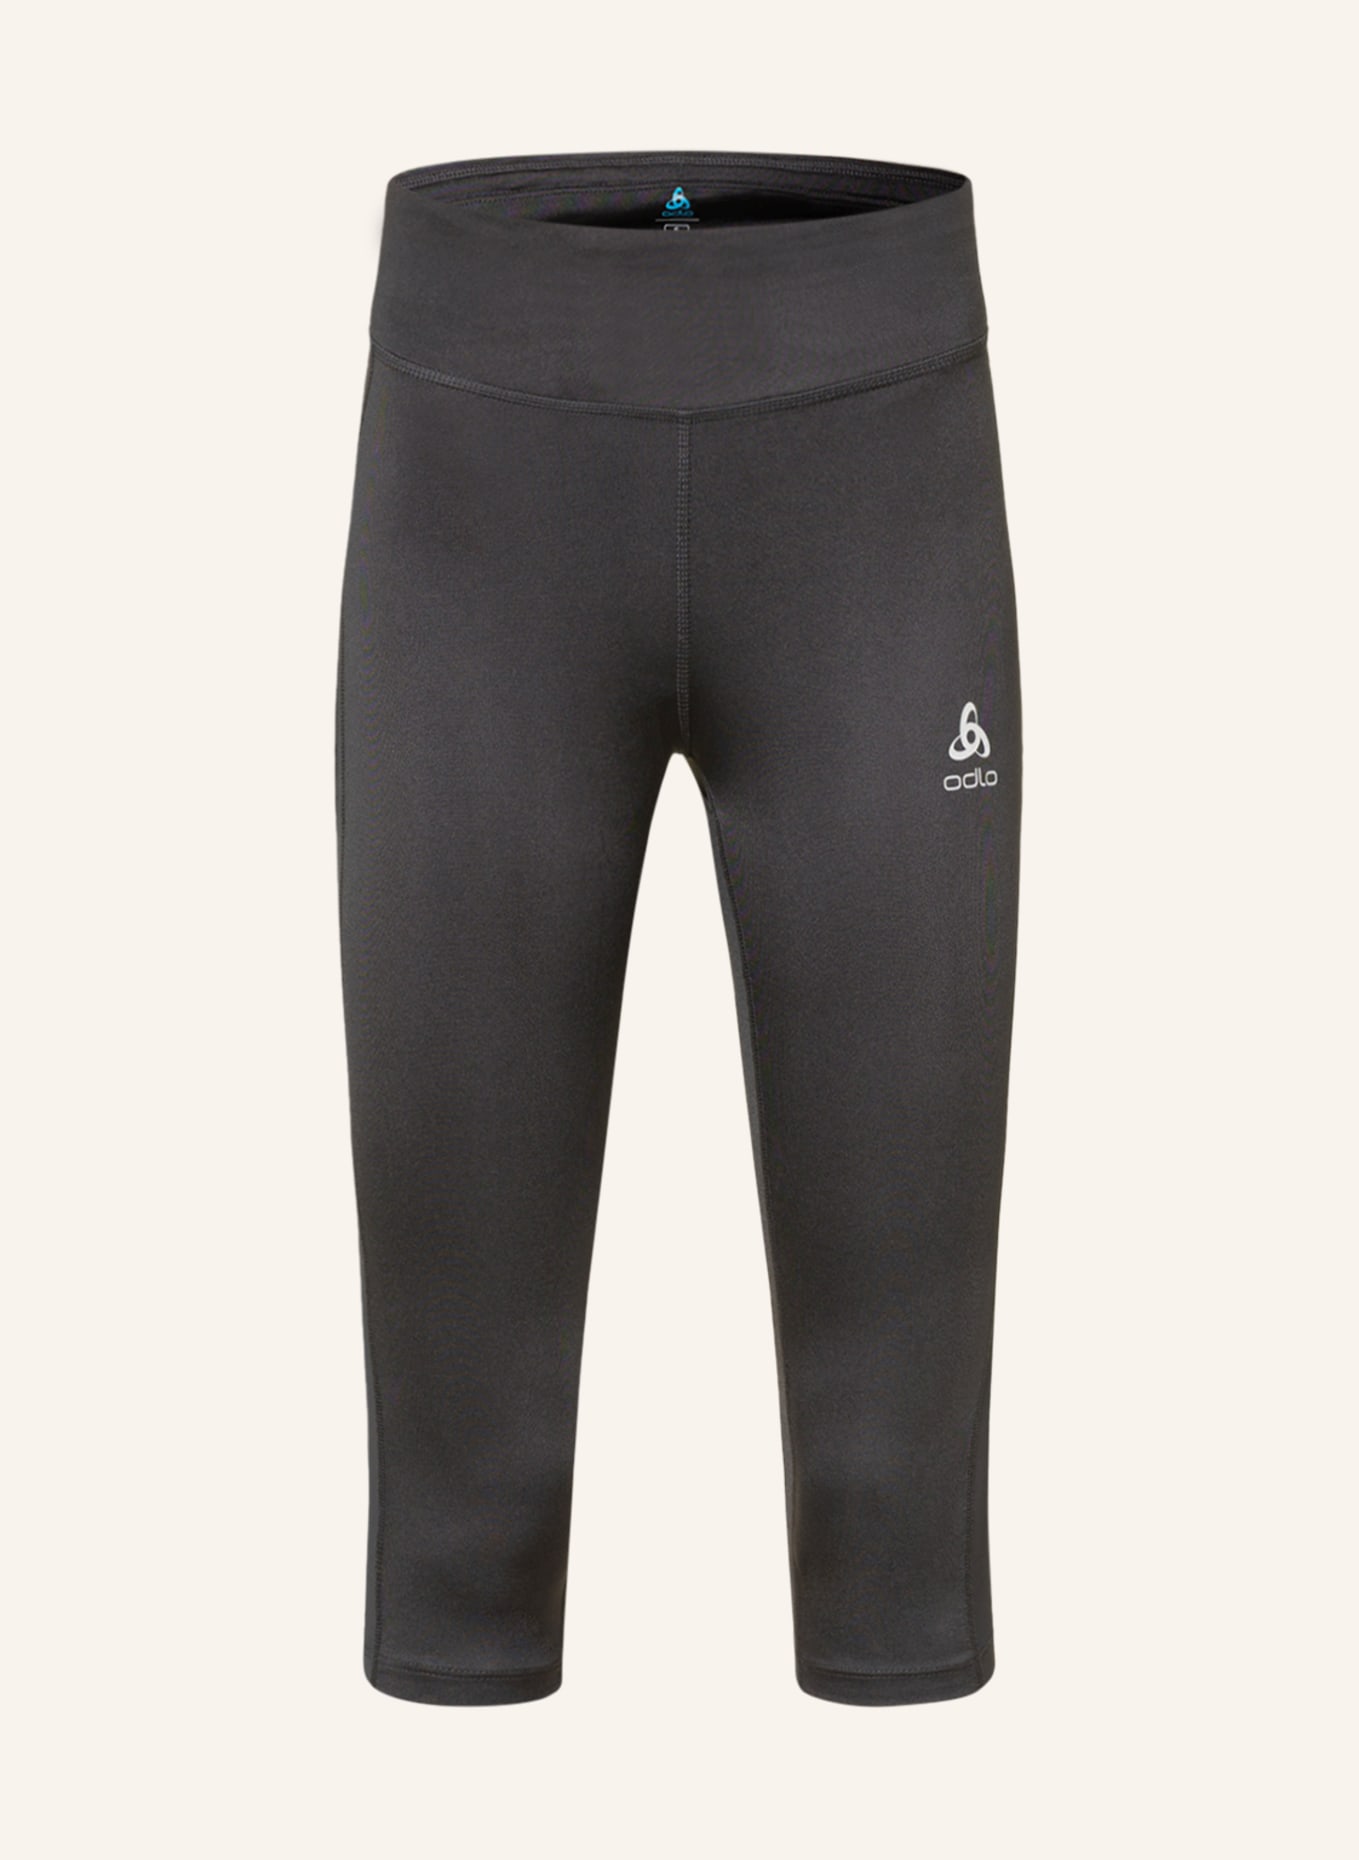 odlo 3/4 running trousers with mesh, Color: BLACK (Image 1)